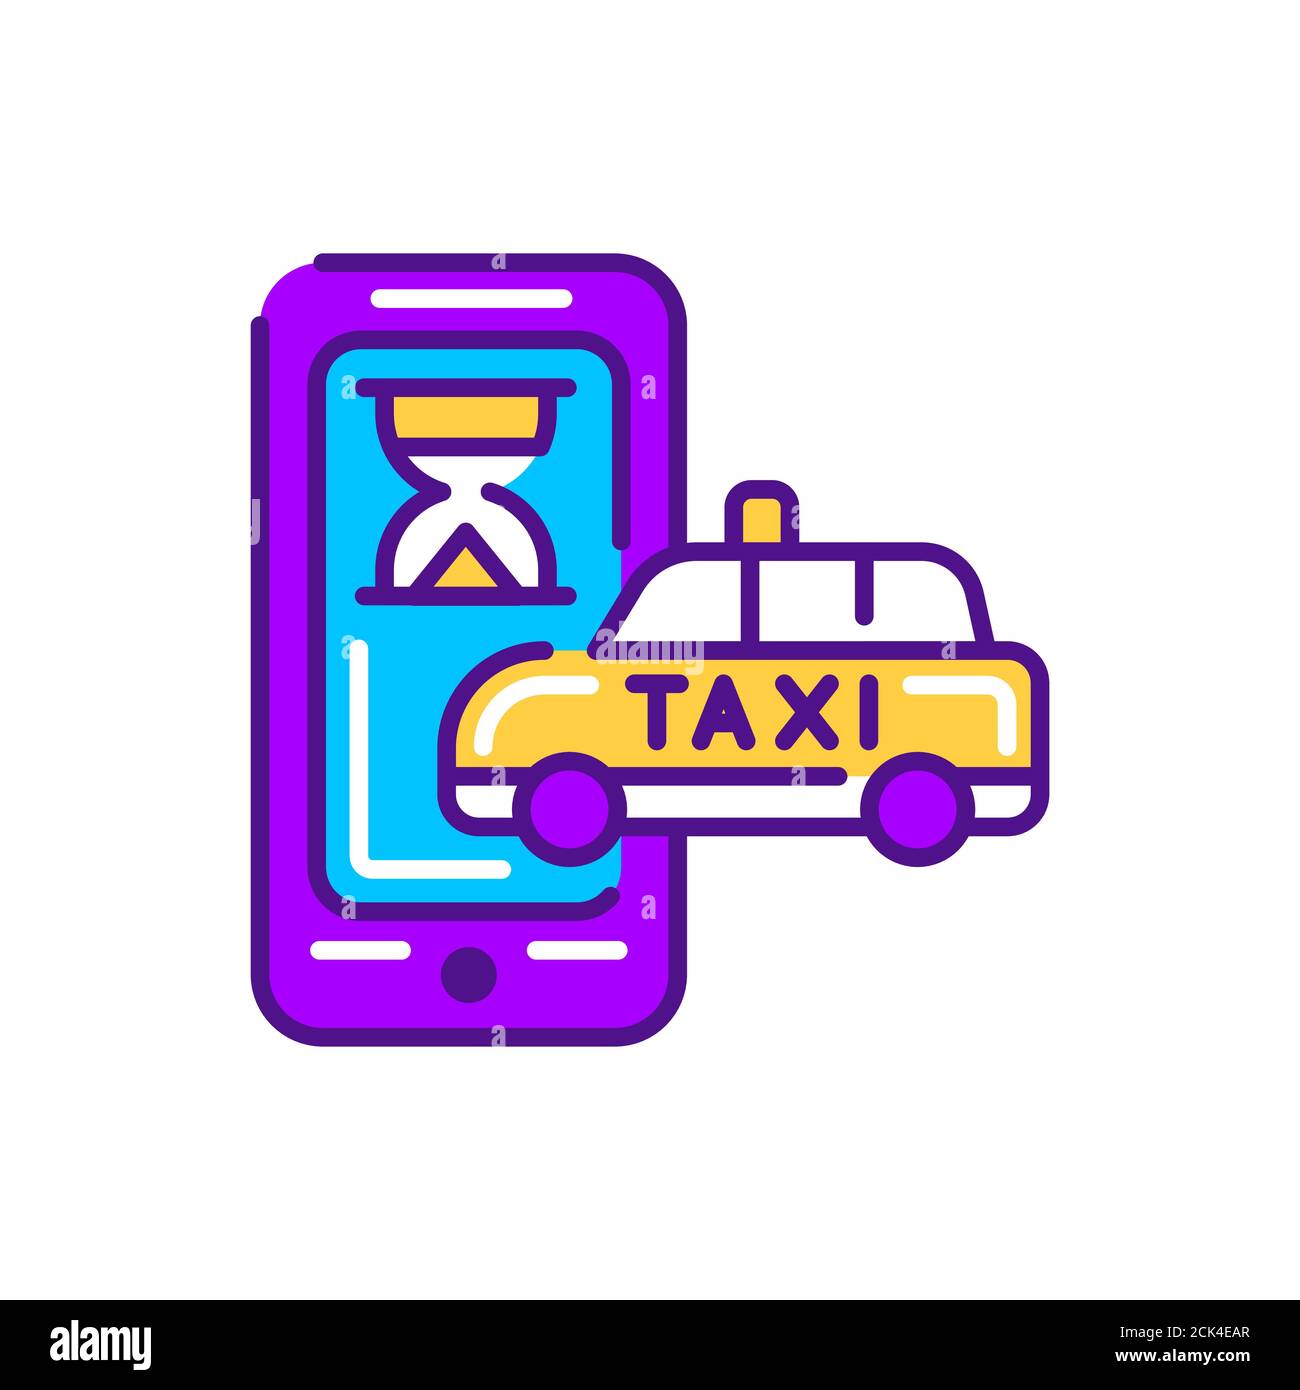 Taxi waiting time color line icon. Online mobile application order taxi service. Pictogram for web, mobile app, promo. UI UX design element. Stock Vector